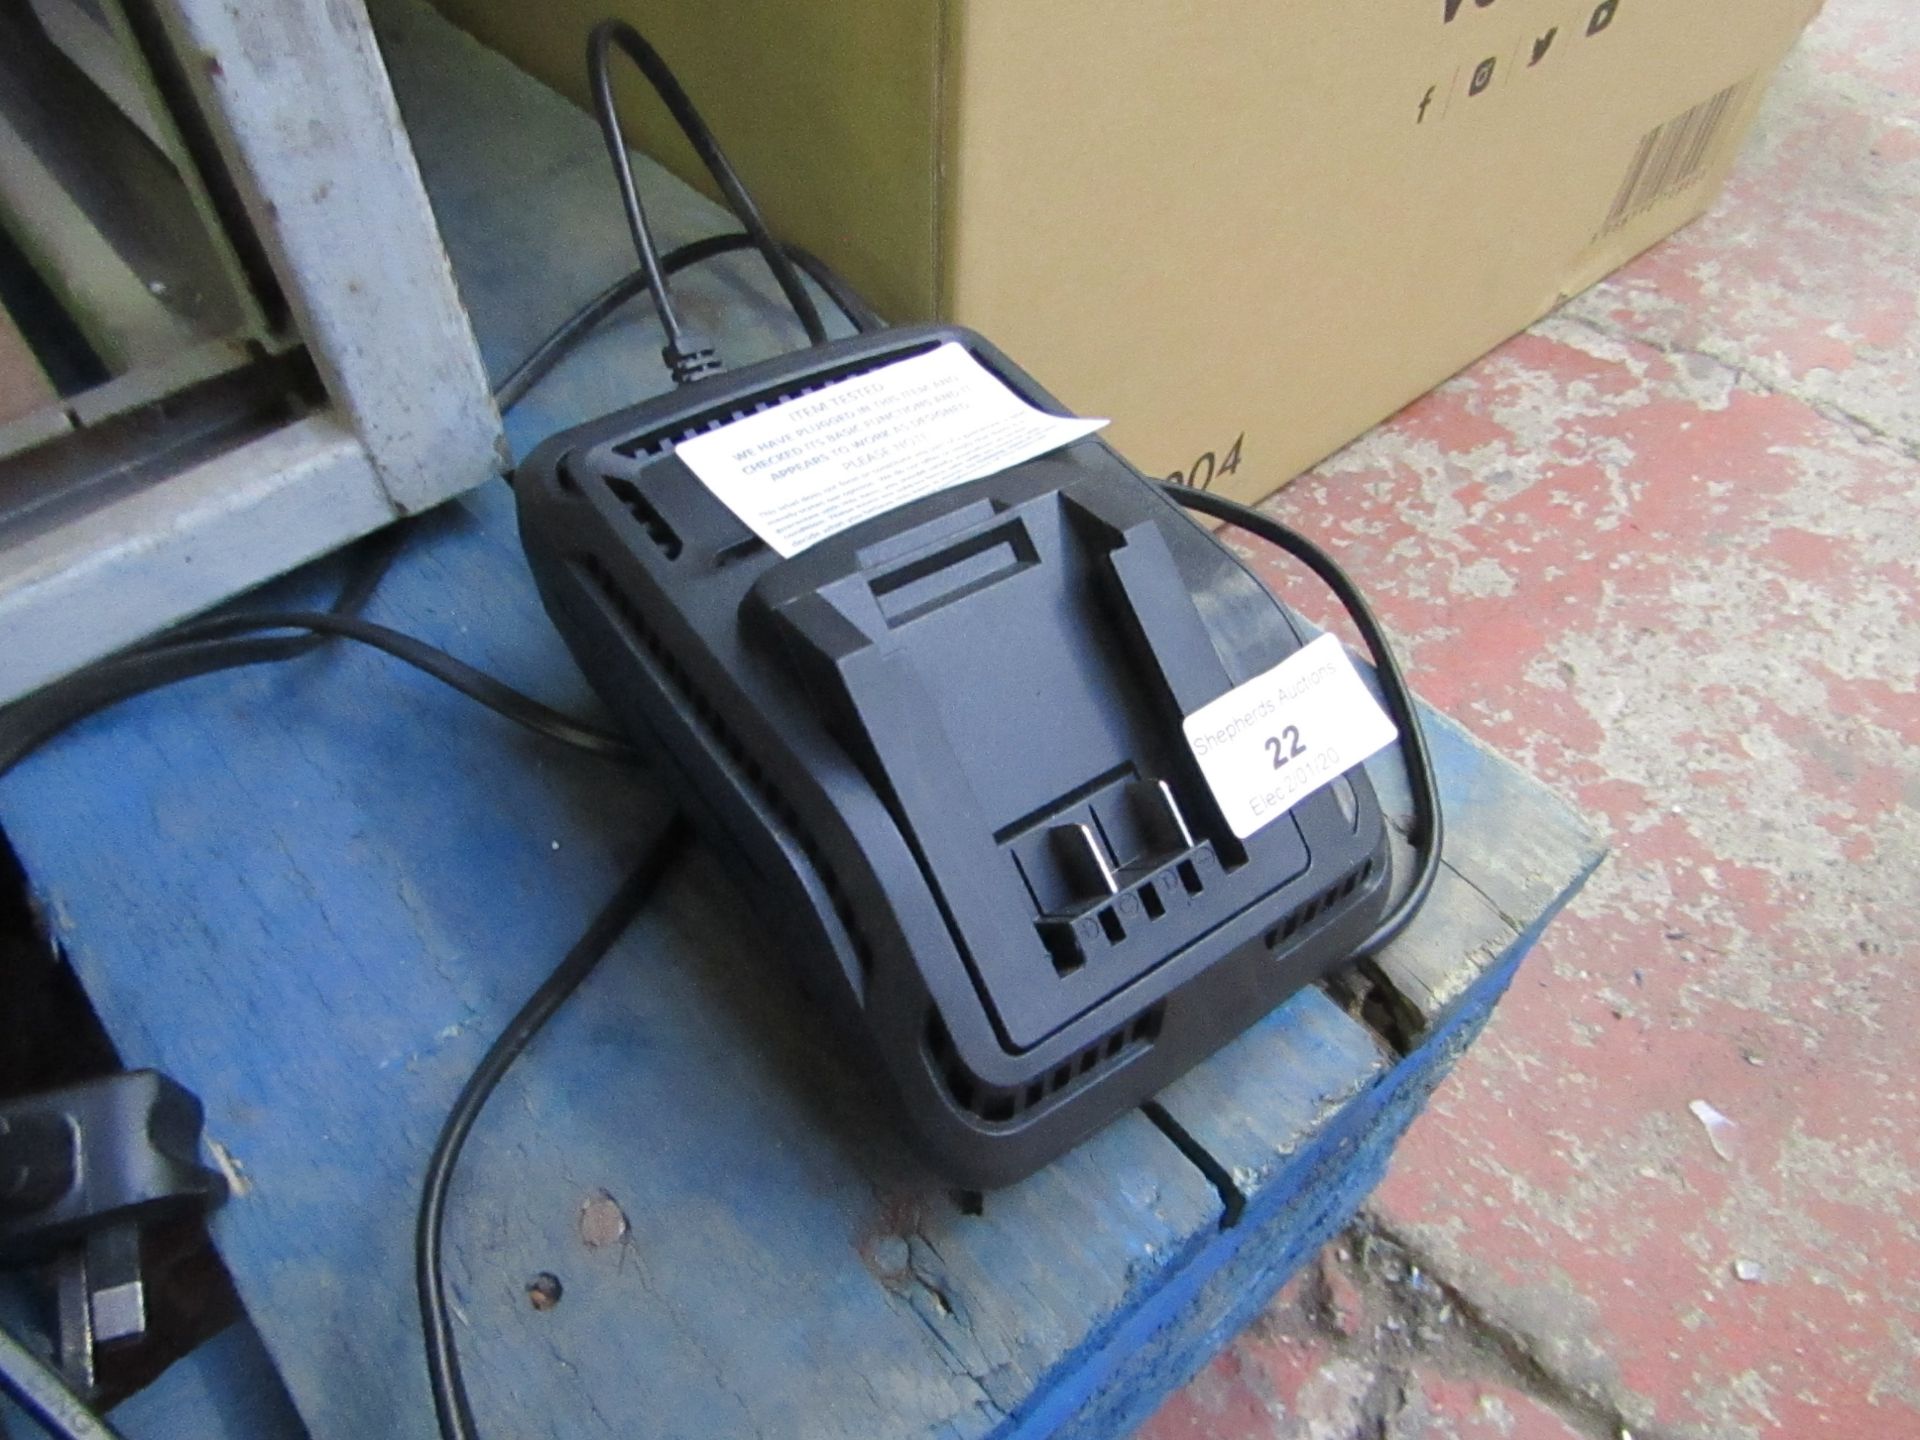 18V Charger Pack for Electrical Tools - Tested working.